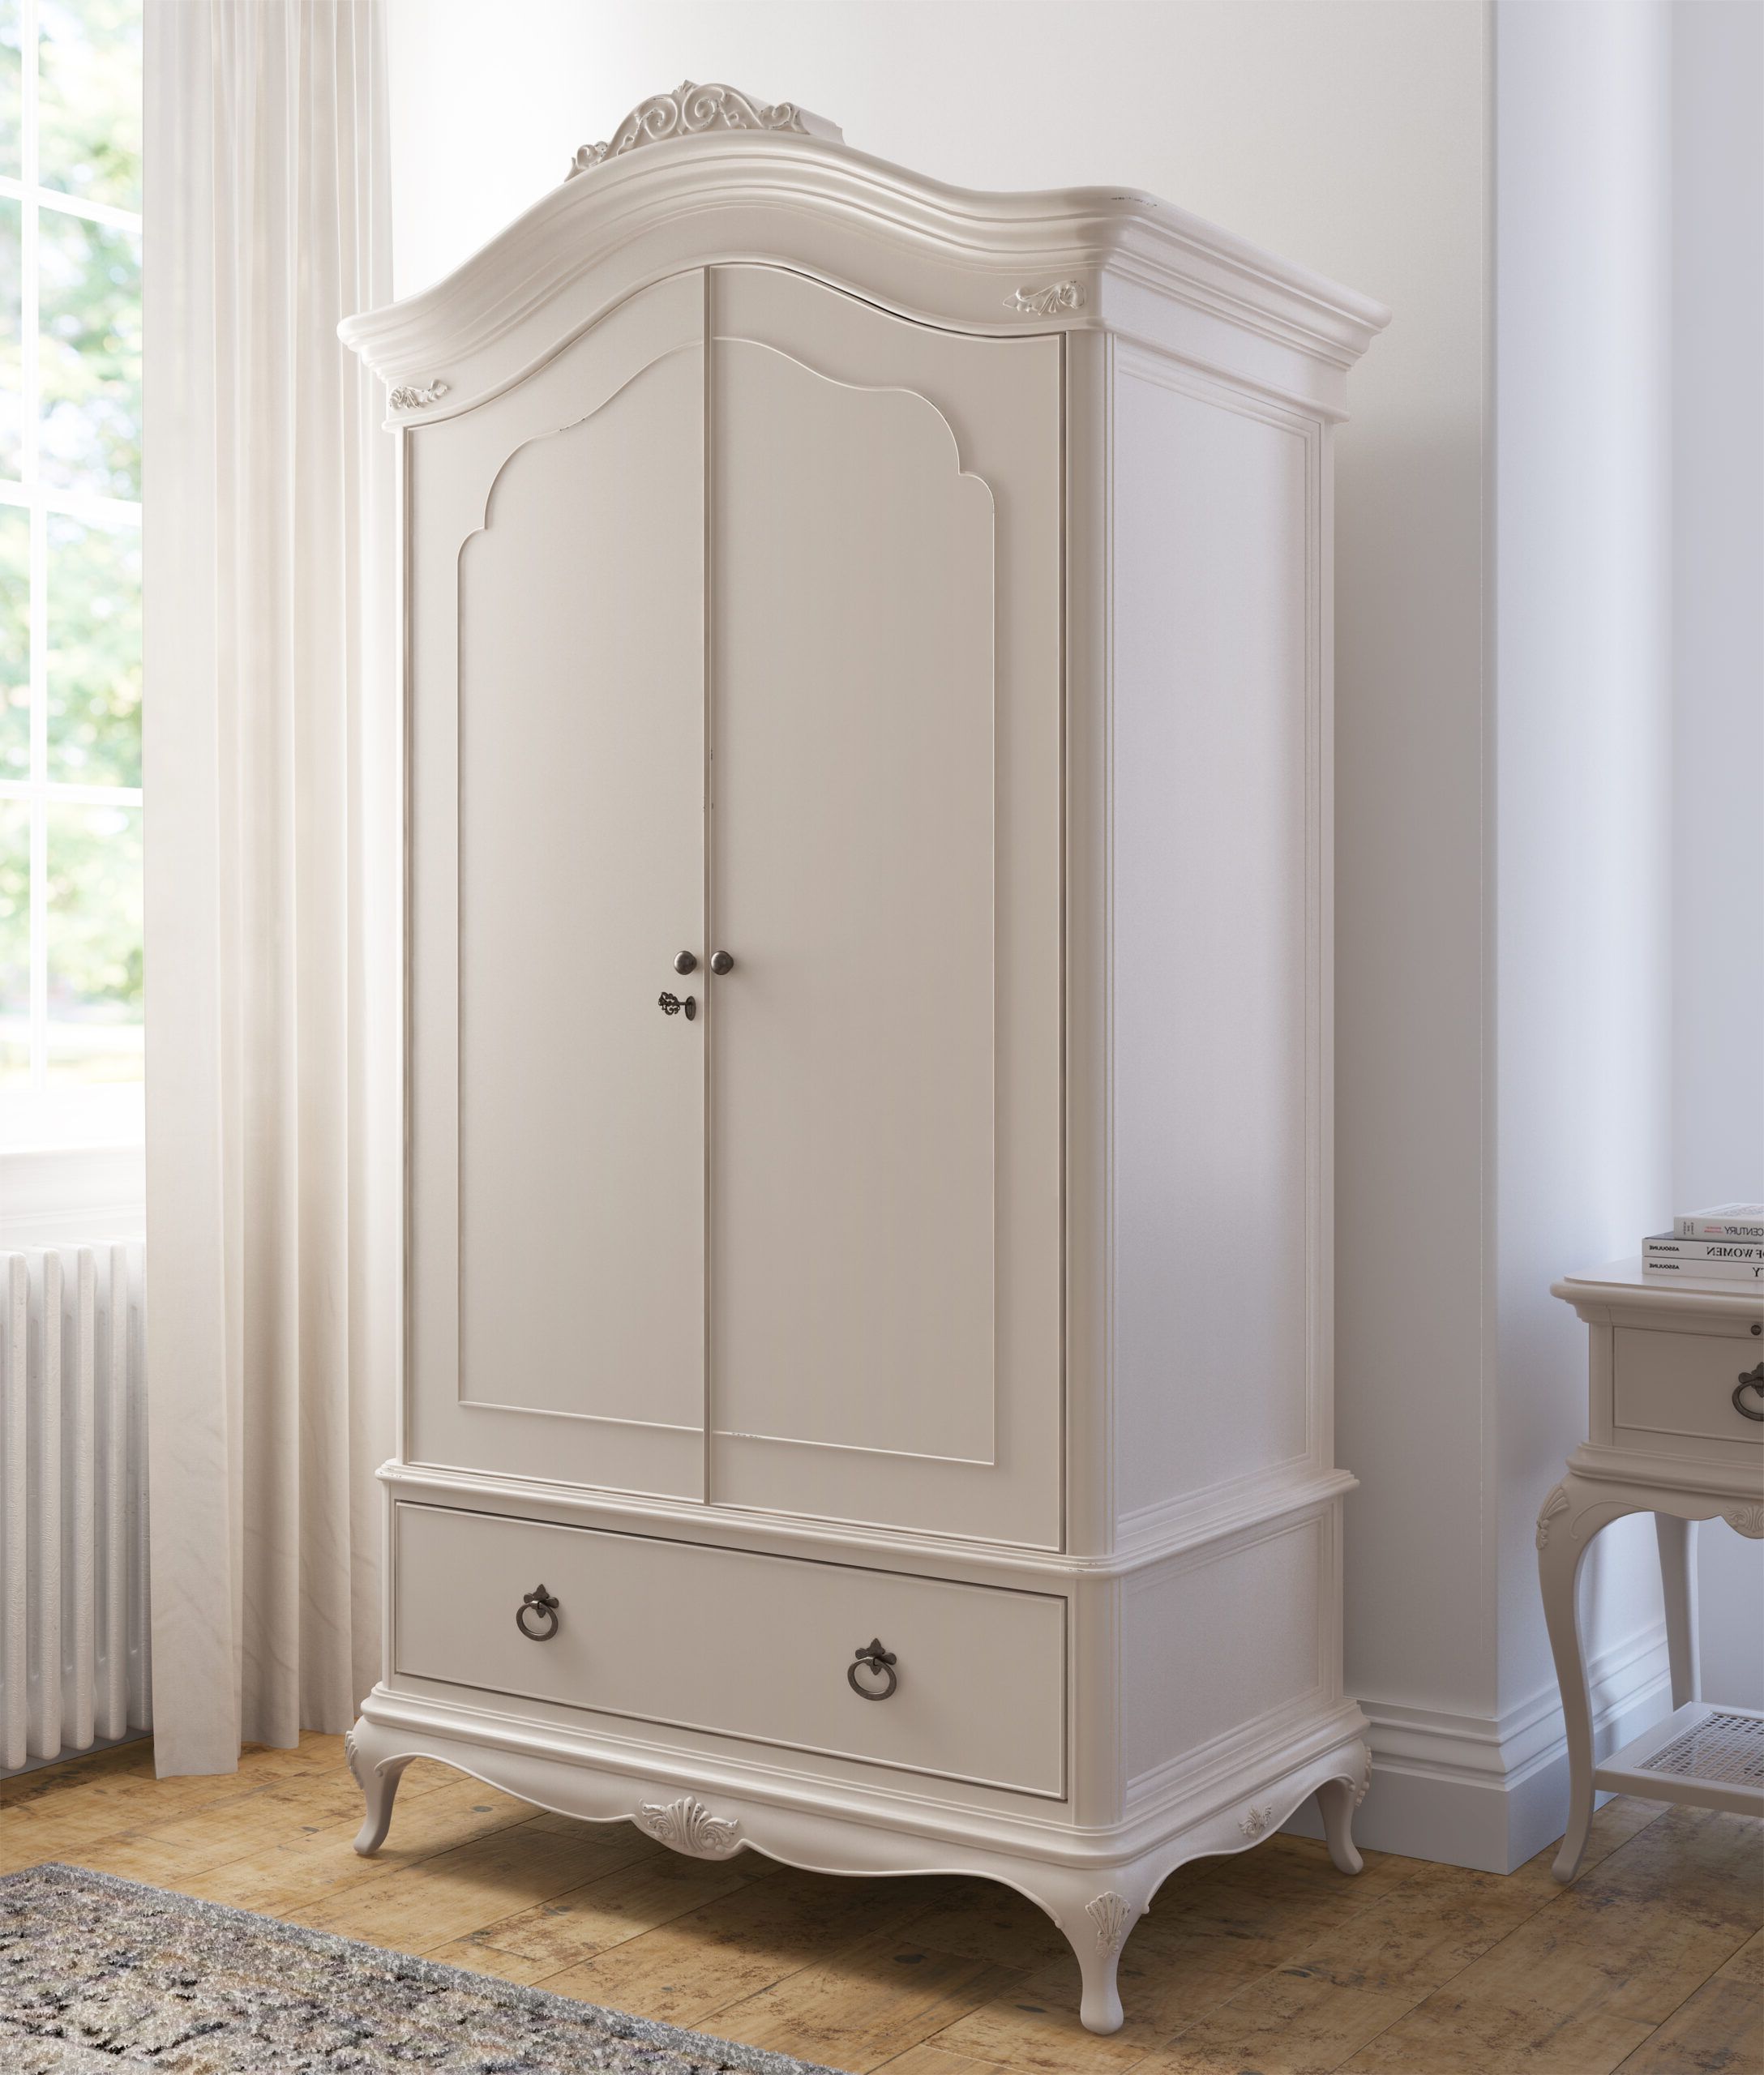 Willis & Gambier Ivory 2 Door 1 Drawer Double Wardrobe – Love The Bed Inside Shabby Chic Wardrobes For Sale (Gallery 11 of 20)